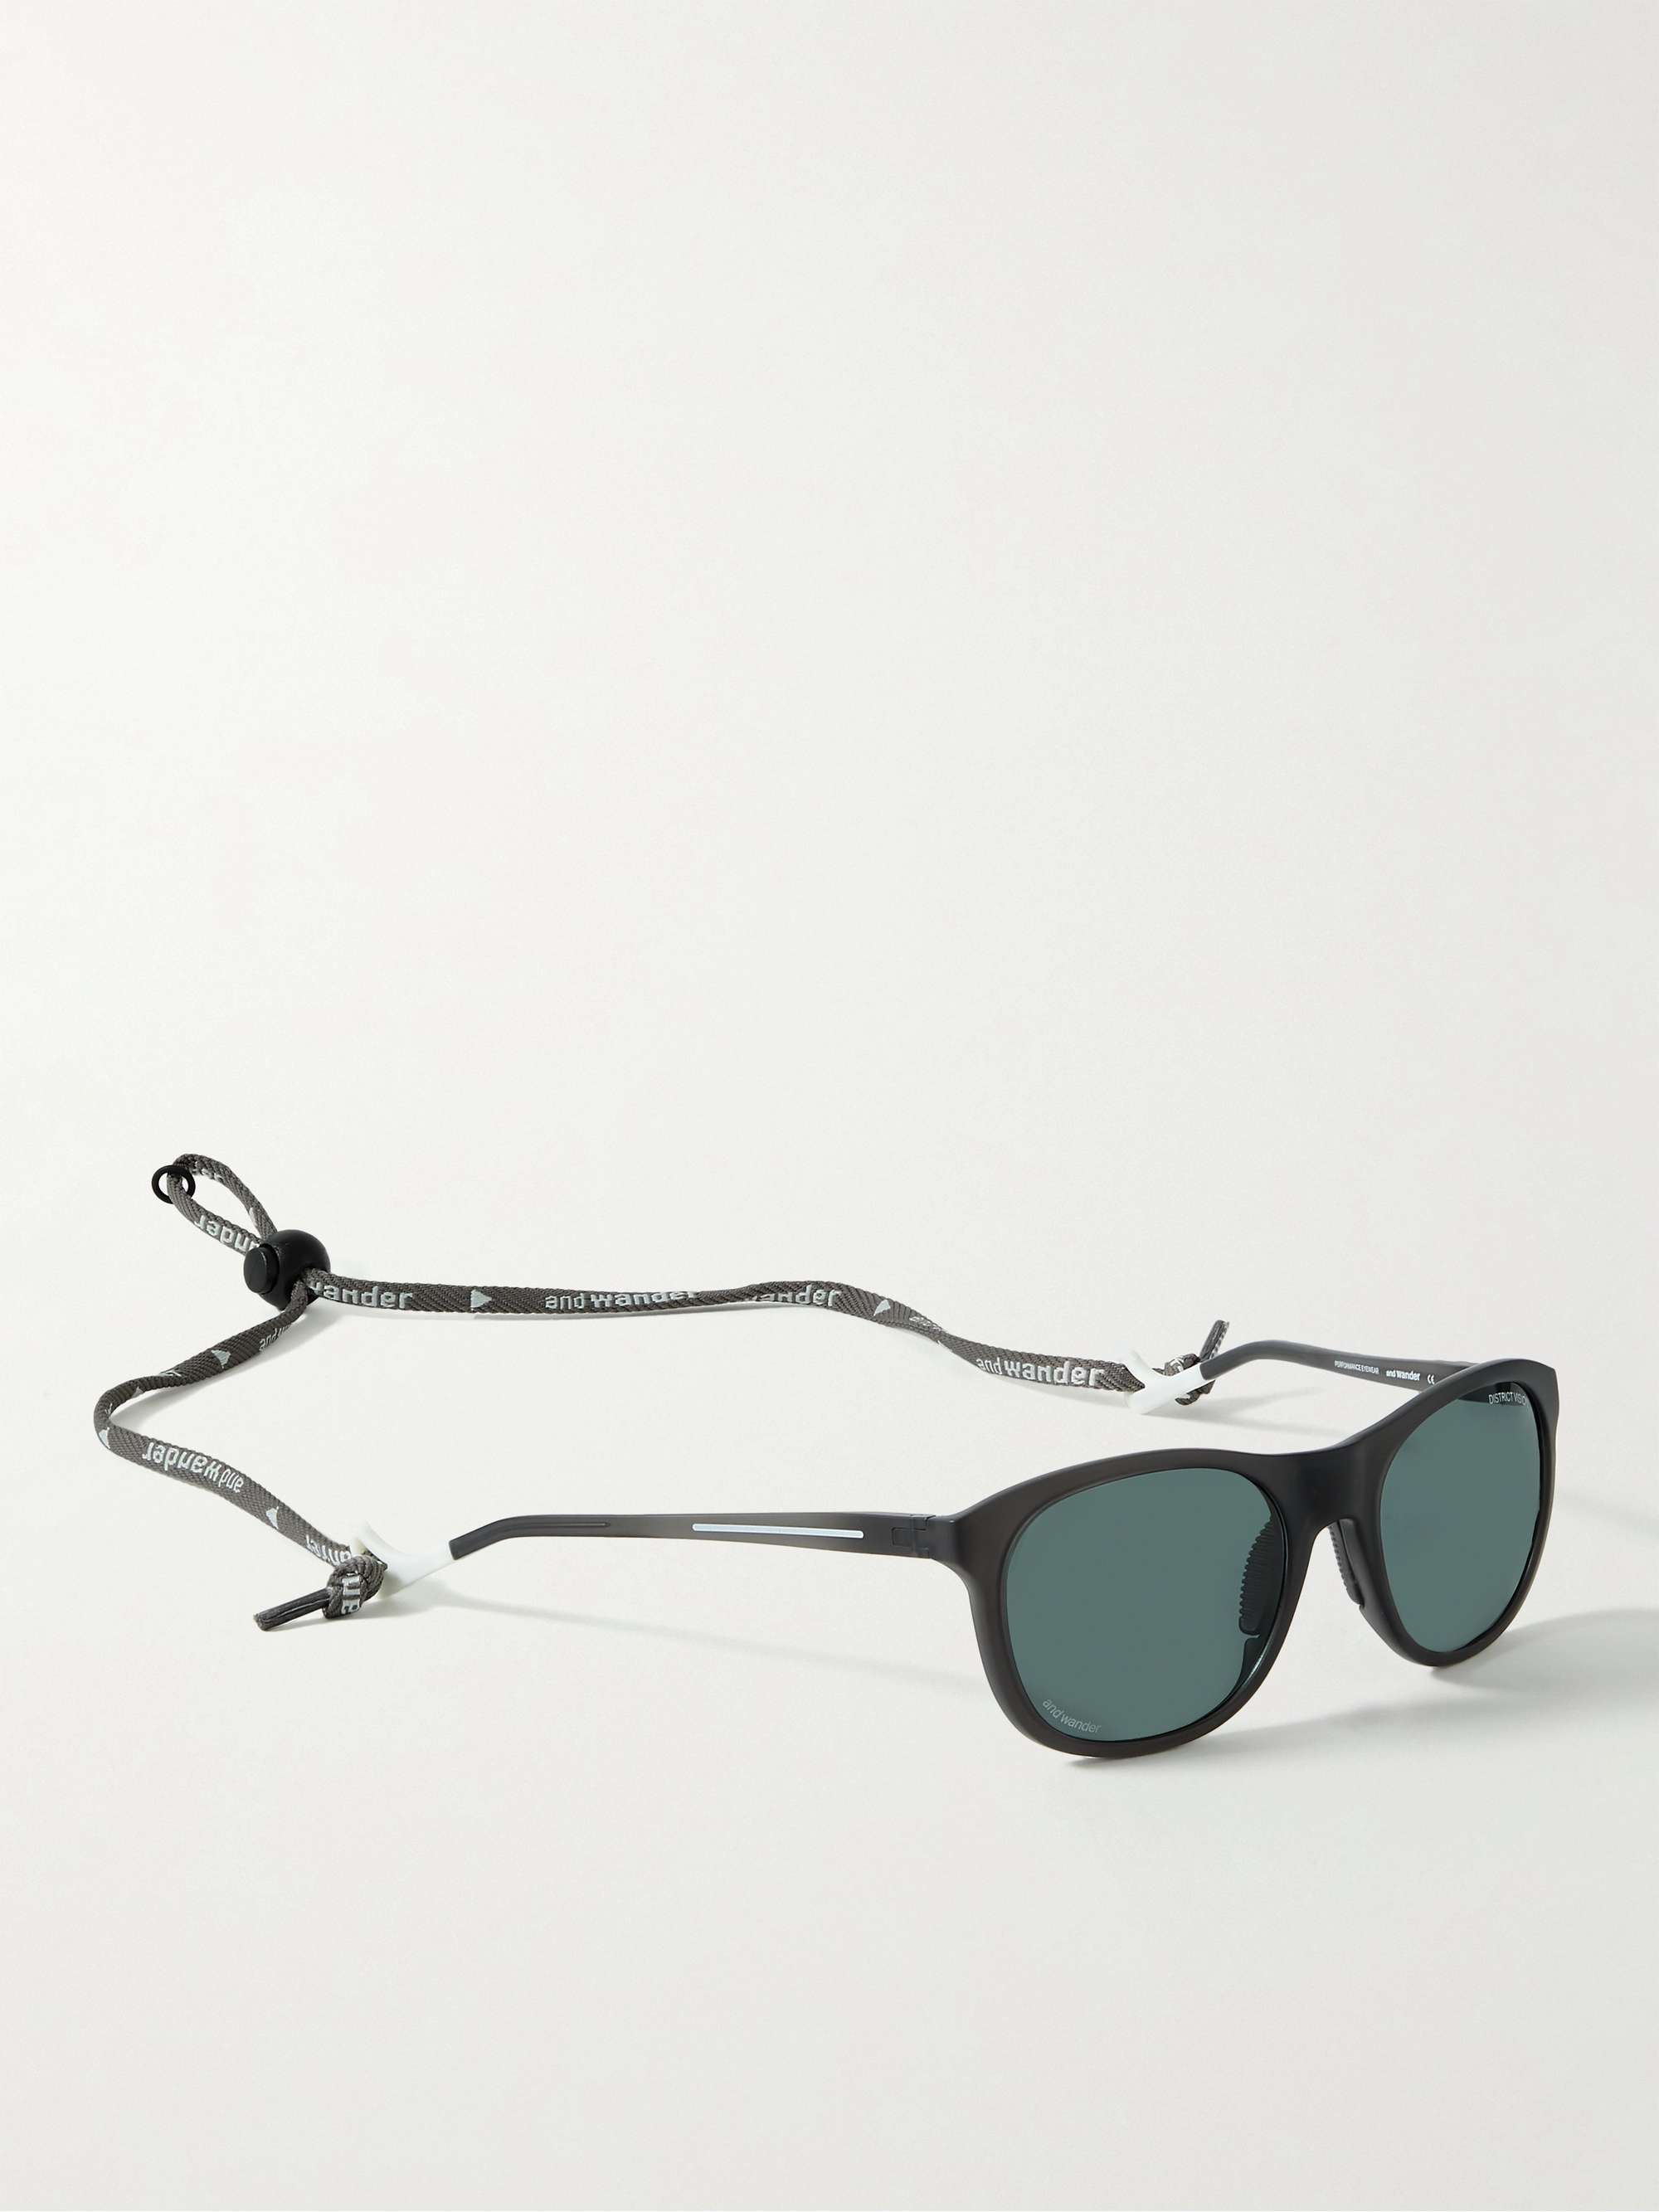 DISTRICT VISION + And Wander Nako Multisport D-Frame Acetate Sunglasses with Lanyard